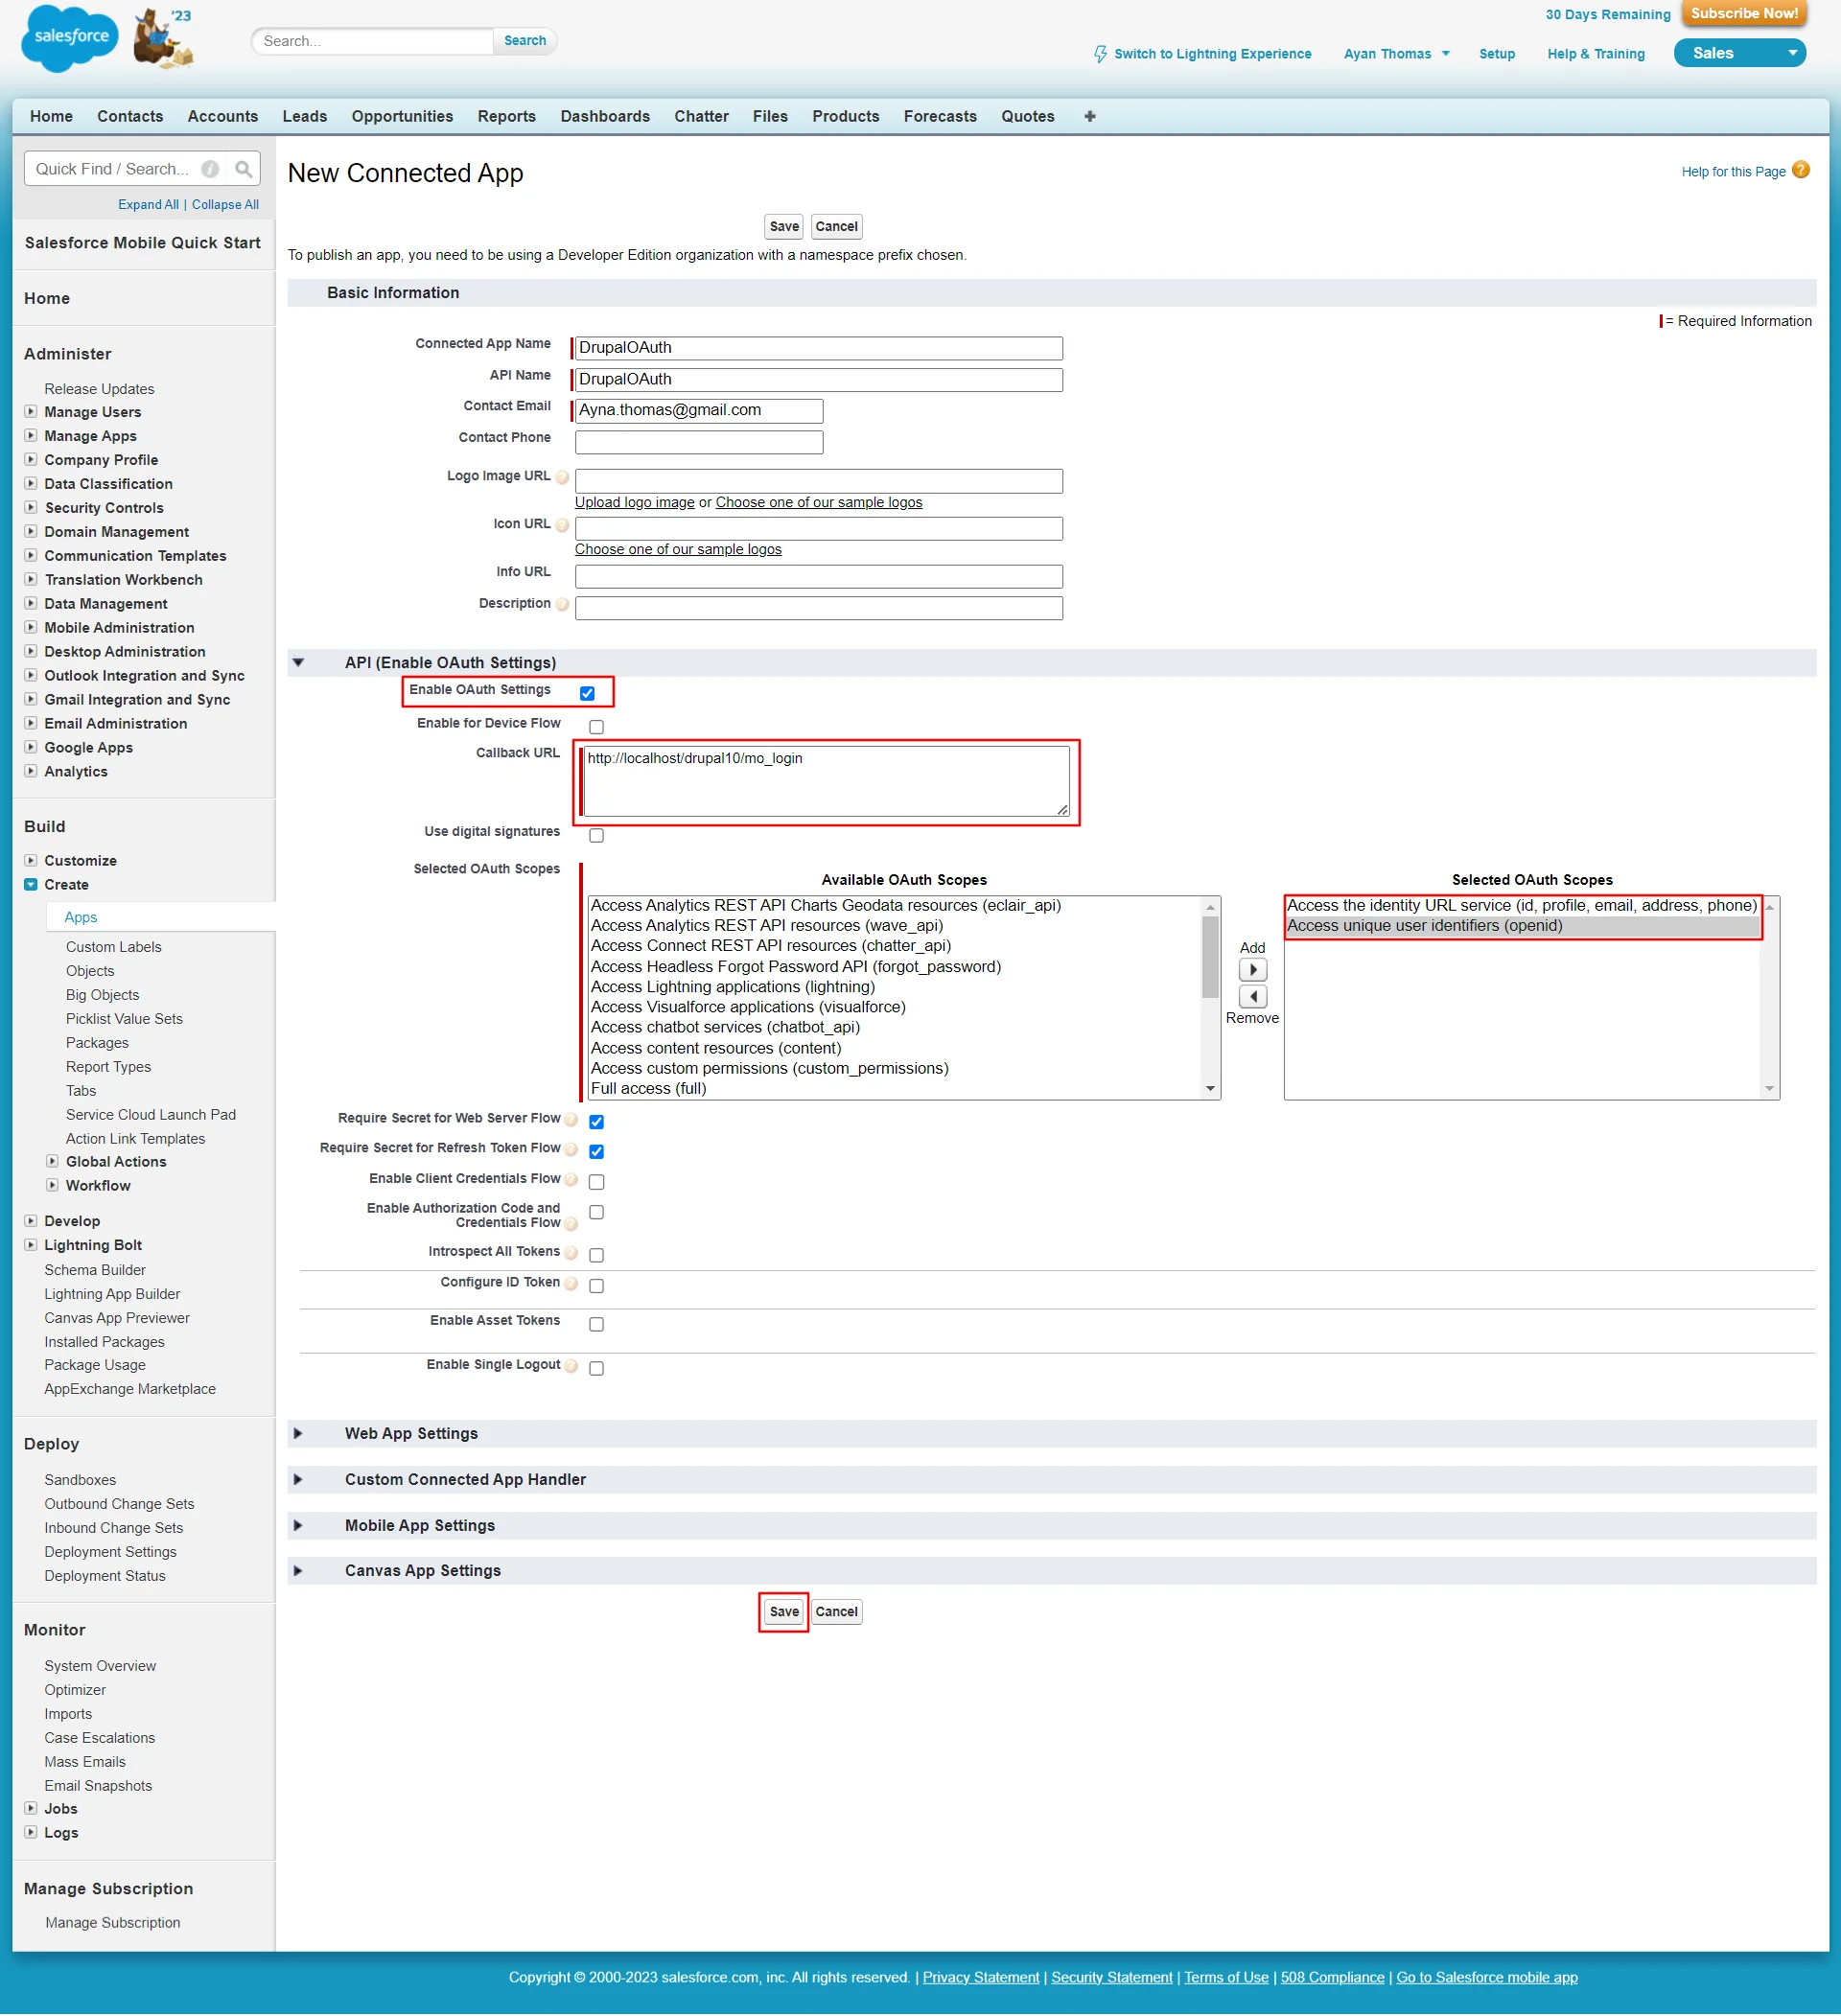 Salesforce SSO integartion - Under API (Enable OAuth Settings), enter required information